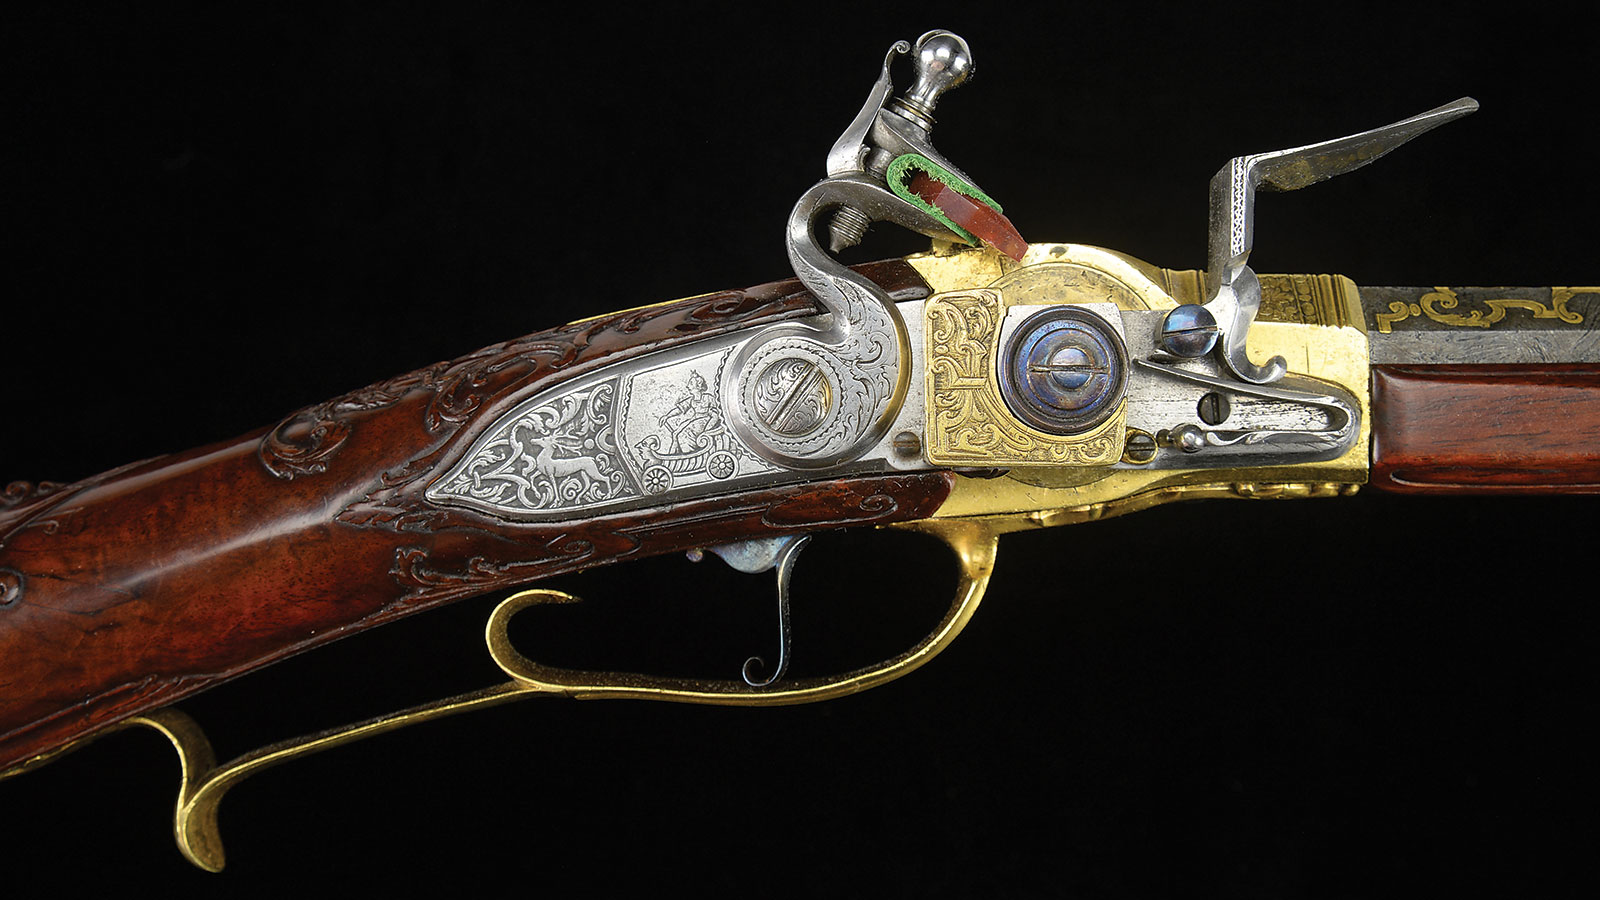 Lorenzoni-System Flintlock Repeating Rifle by Sebastian Hauschka Made for & Presented to King Louis XV of France, circa 1735, estimated at $175,000-275,000.